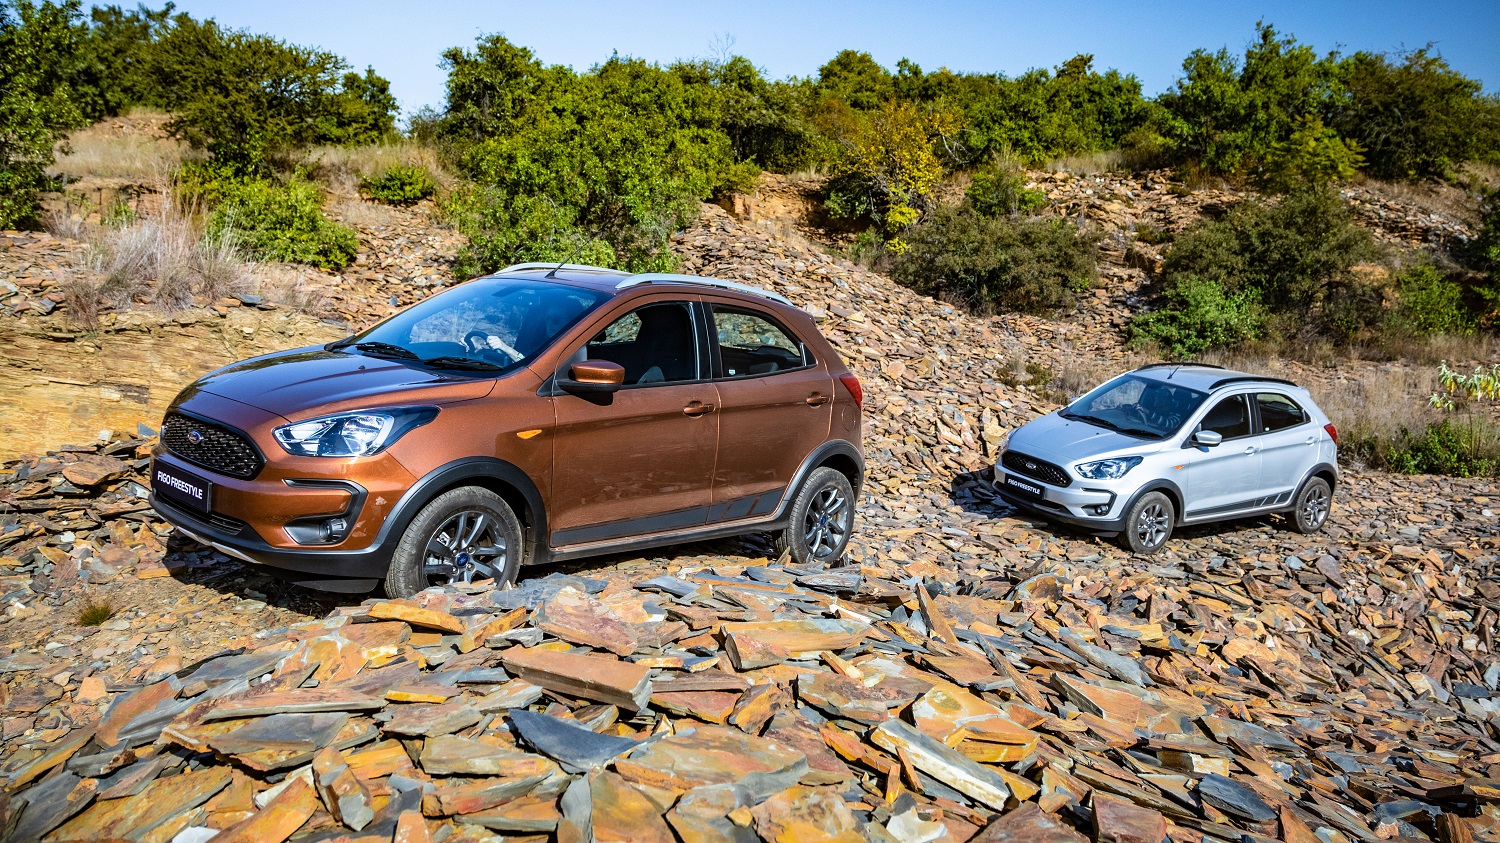 All-New Ford Figo Freestyle Targets Active And Adventurous Youth Market